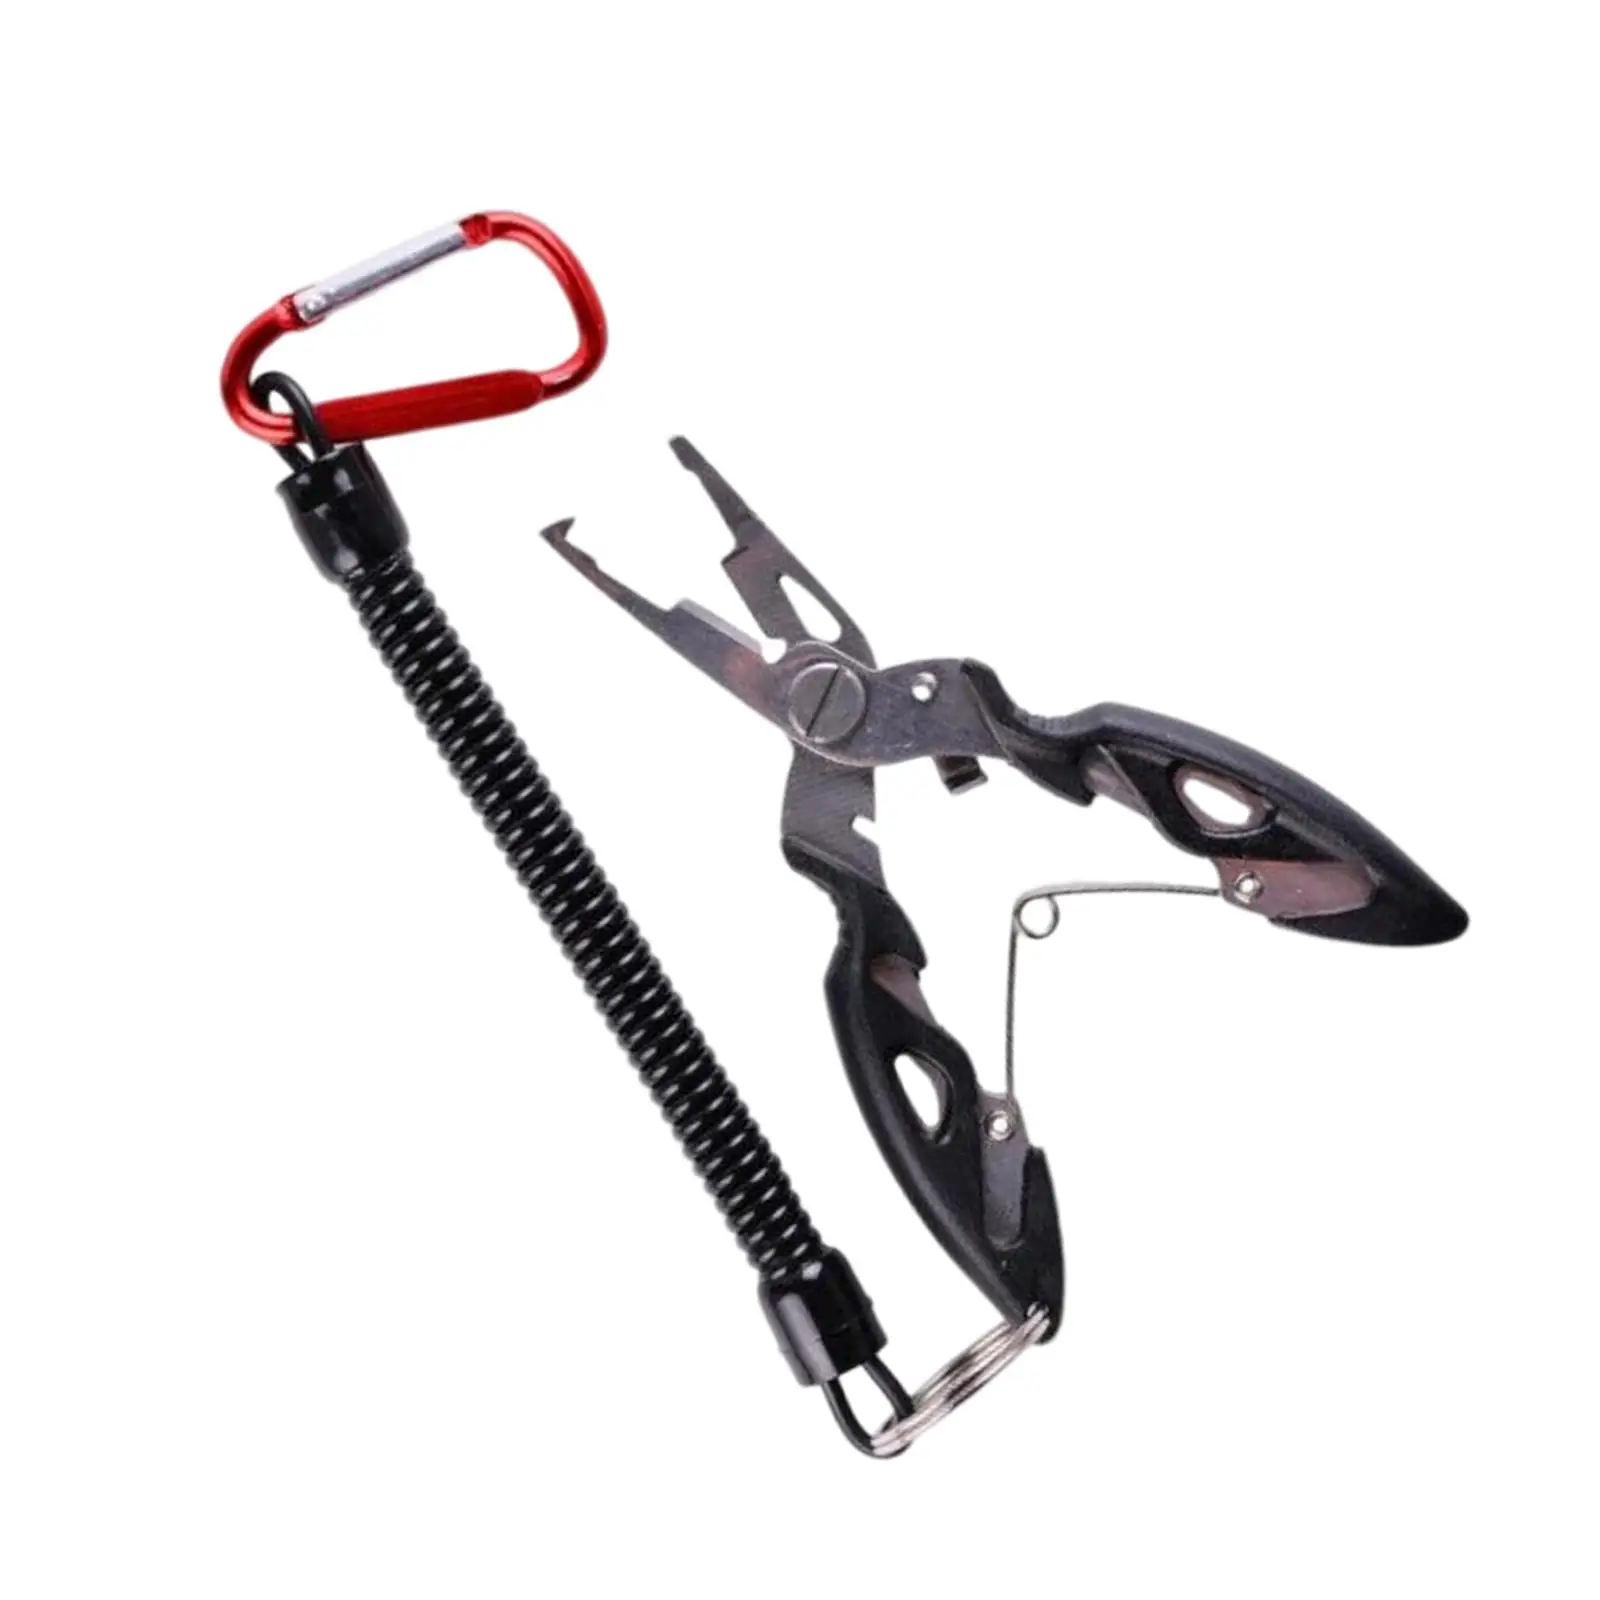 Portable Fishing Pliers Hook Remover with Lanyard Saltwater Freshwater Split Ring Pliers Fishing Accessories Equipment Gadget